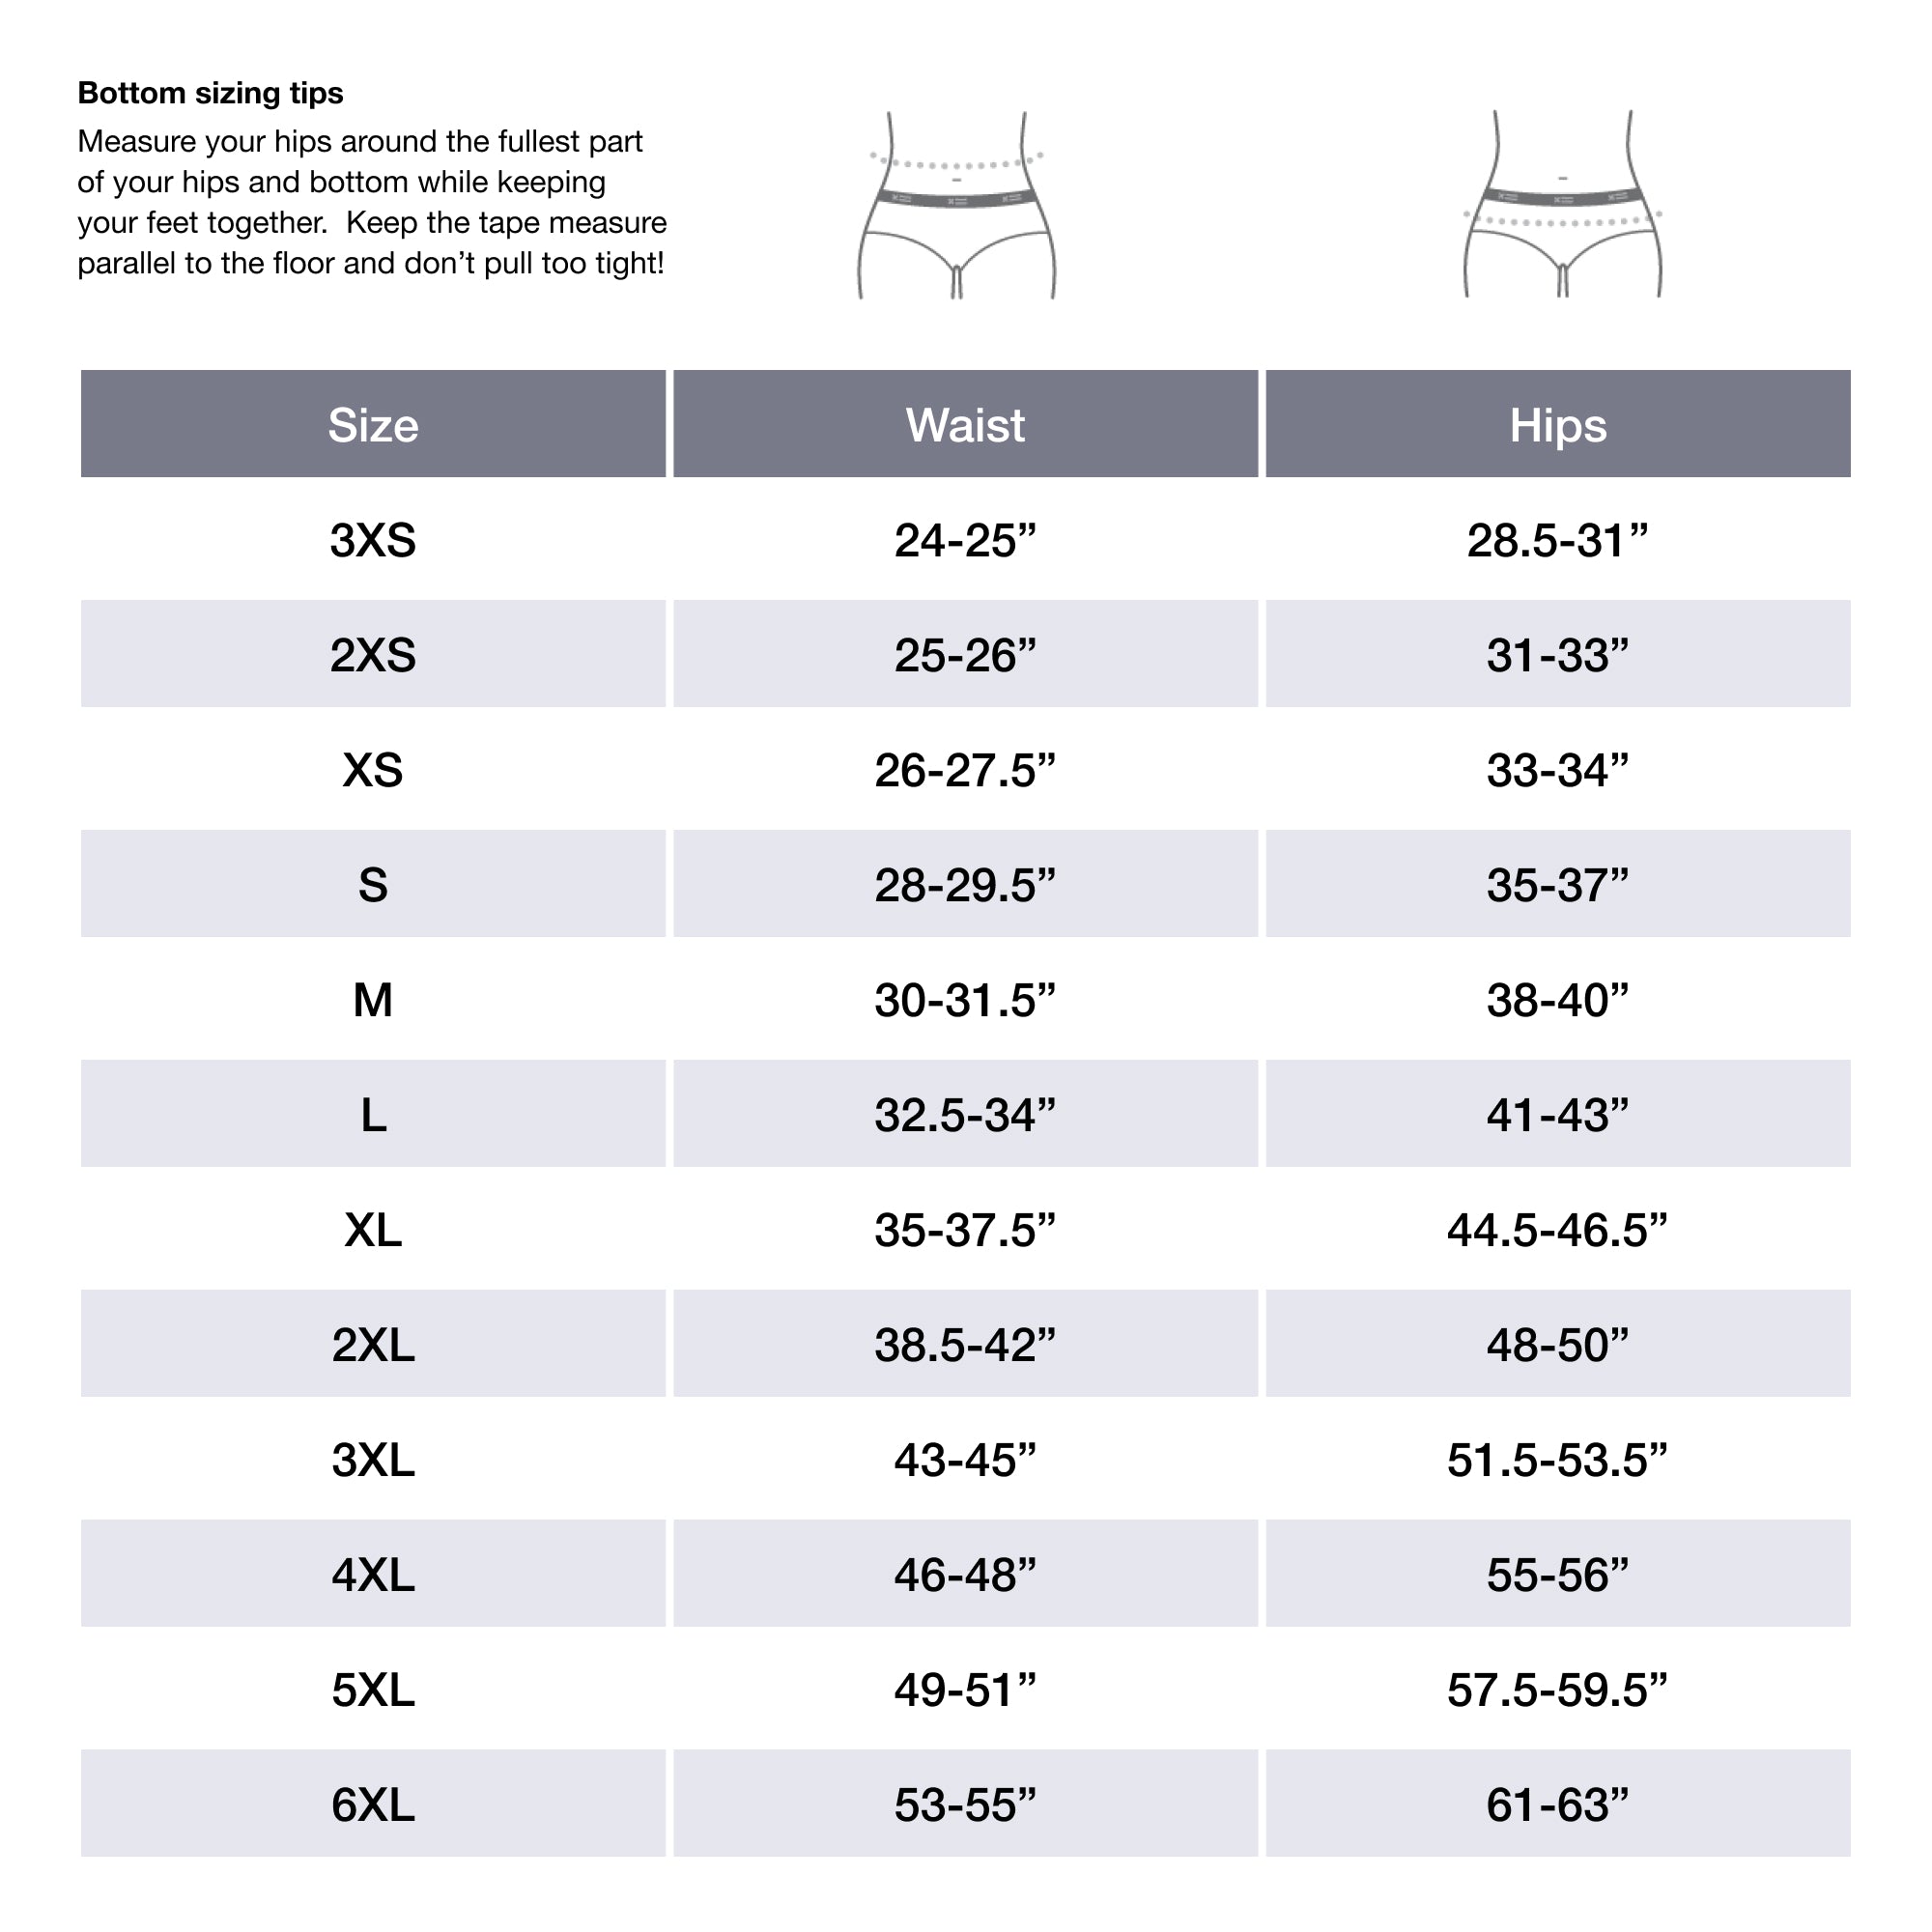 Tomboy X Size Chart, It is made to fit all body types, including